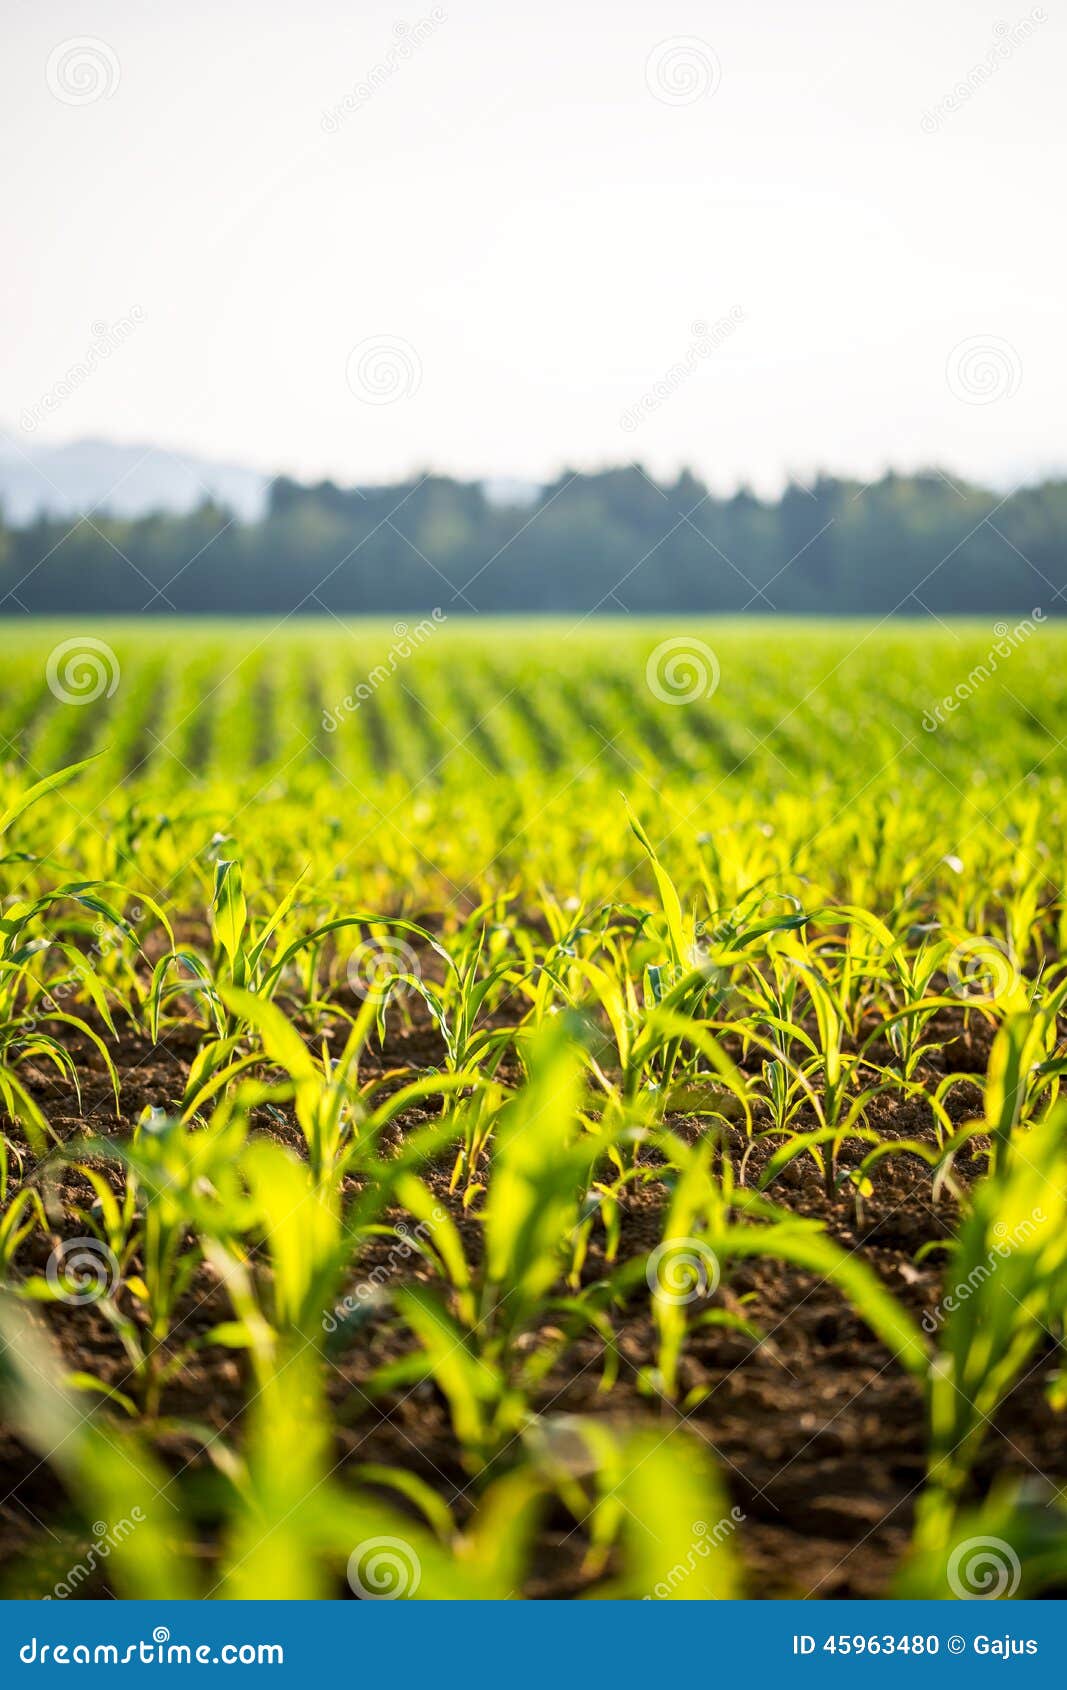 field of young maize plants